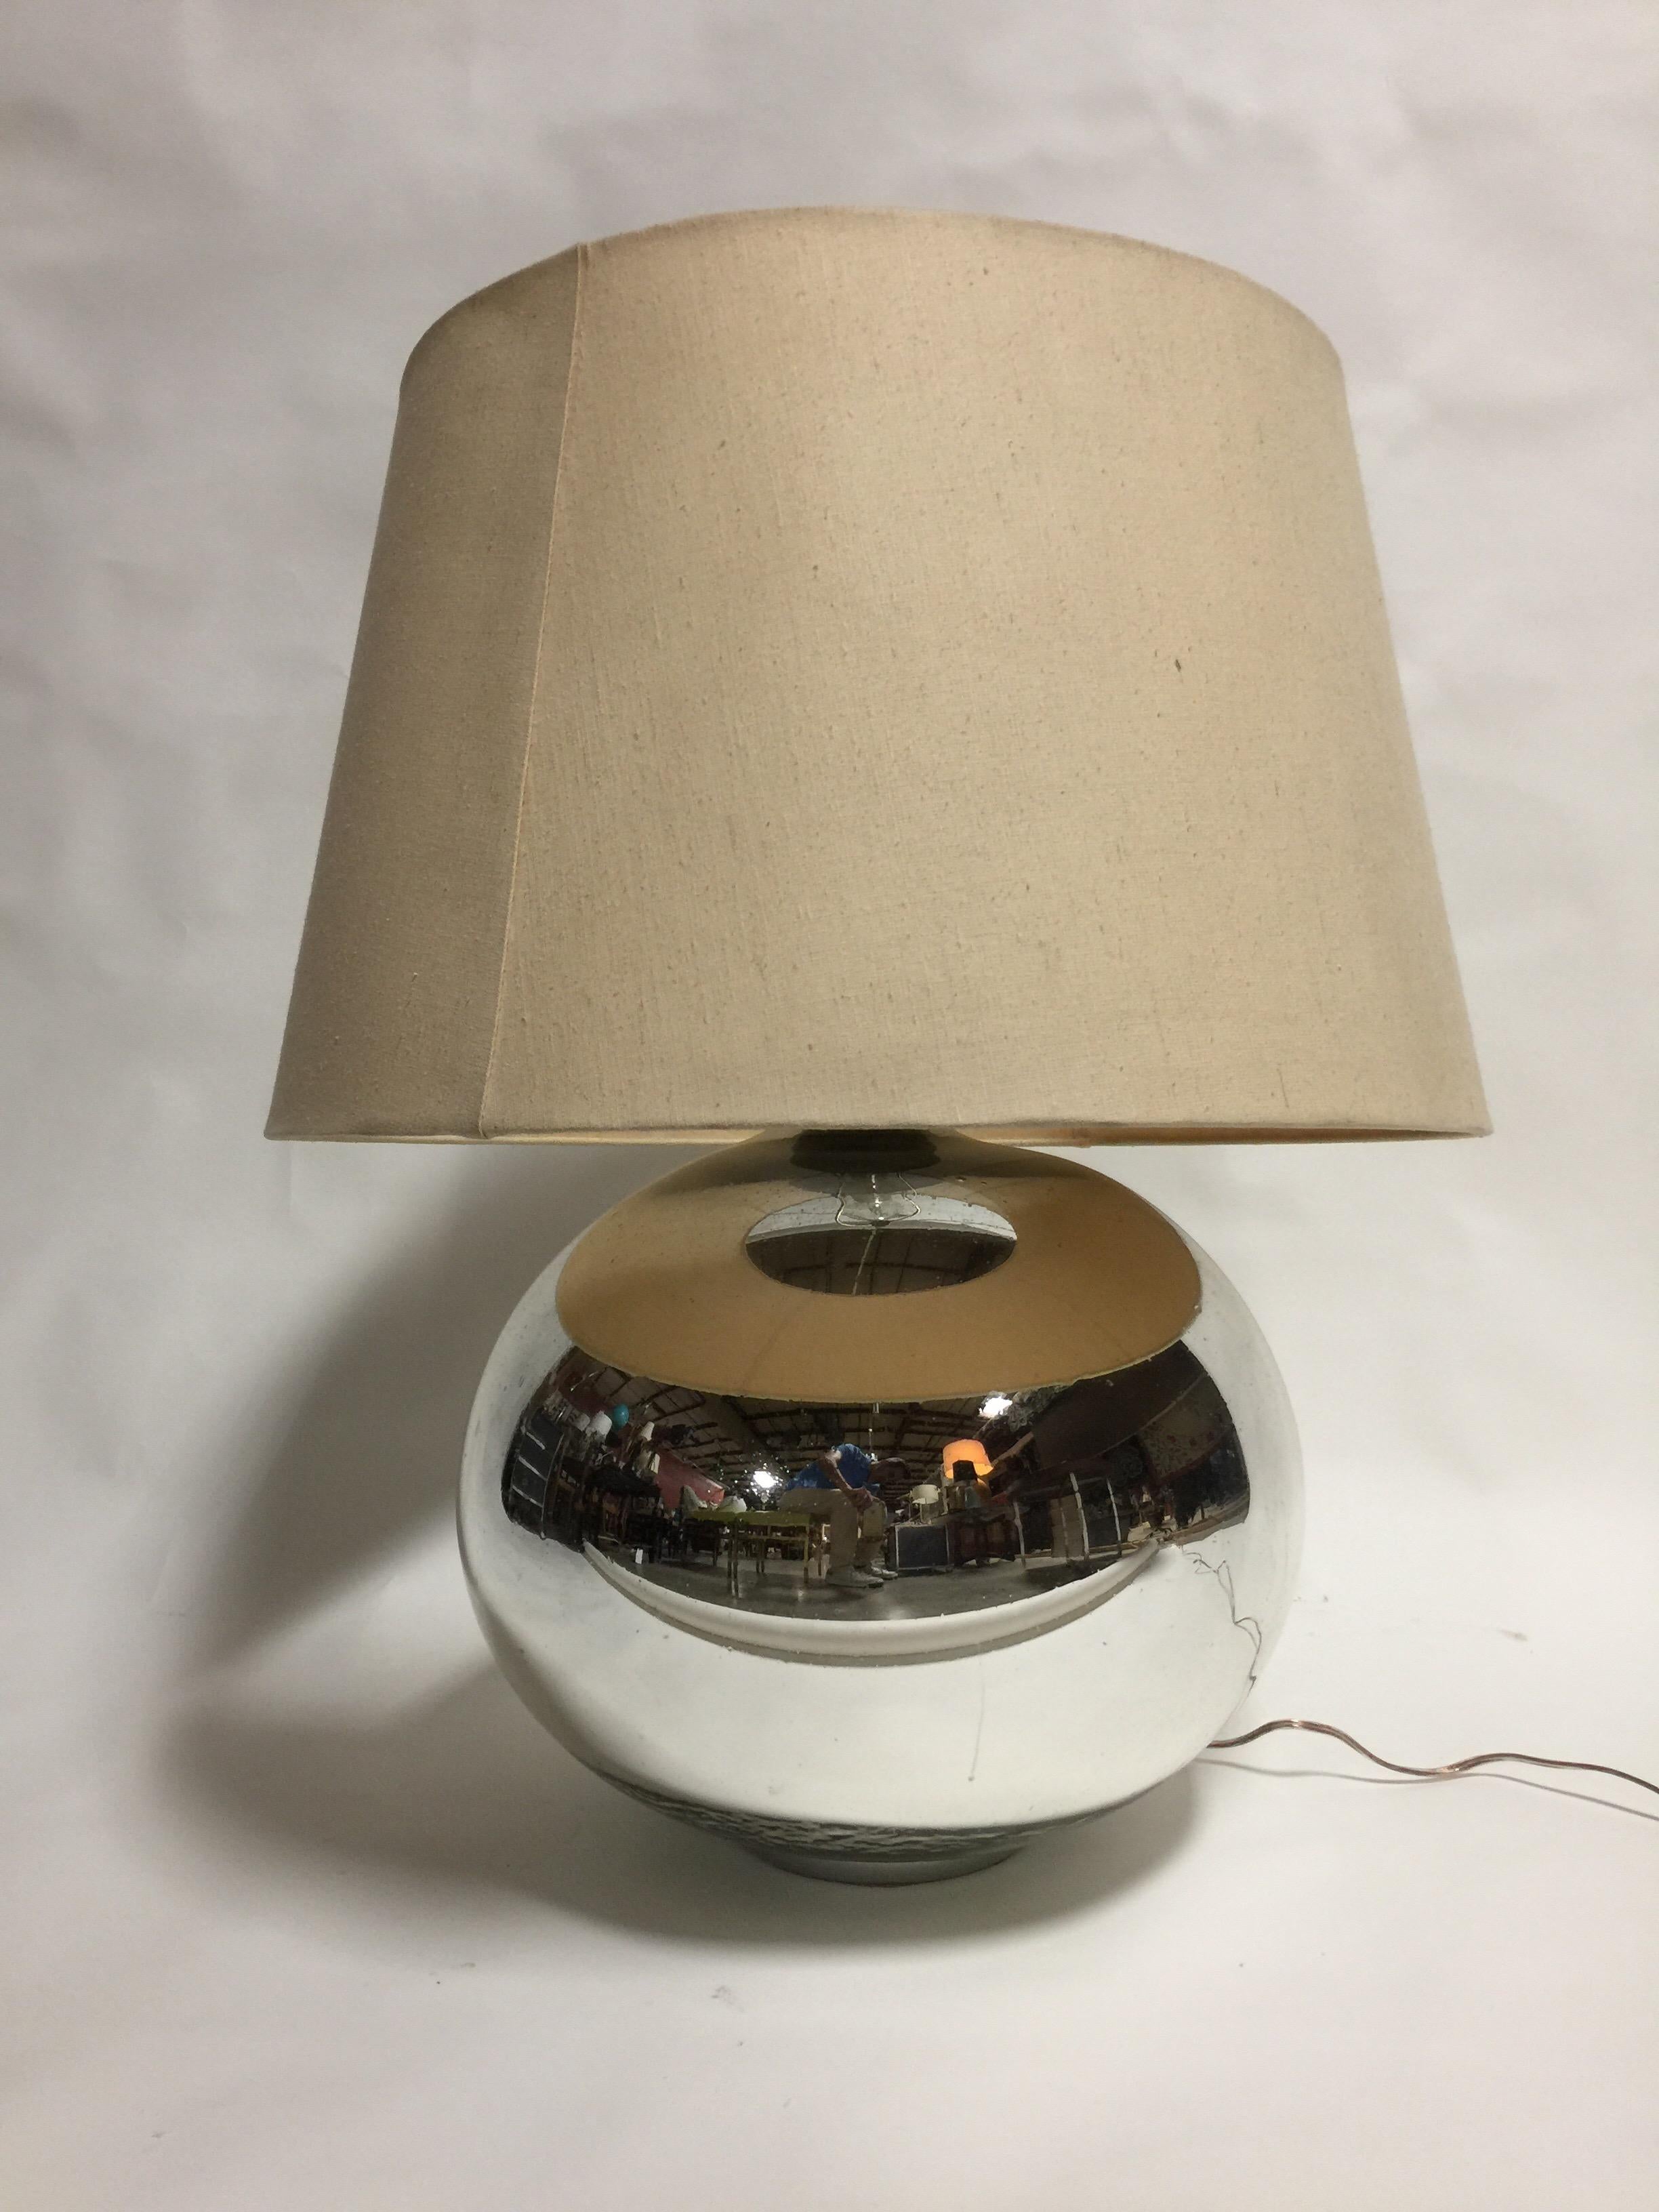 A vintage table lamp with mirrored glass base and cusotm period linen shade. Appears to be mercury glass. USA, circa 1950. Rewired for USA with silk cord; takes one standard US bulb, 100 watts max.

Dimensions: 
Lamp--16 inches W x 17 inches H to